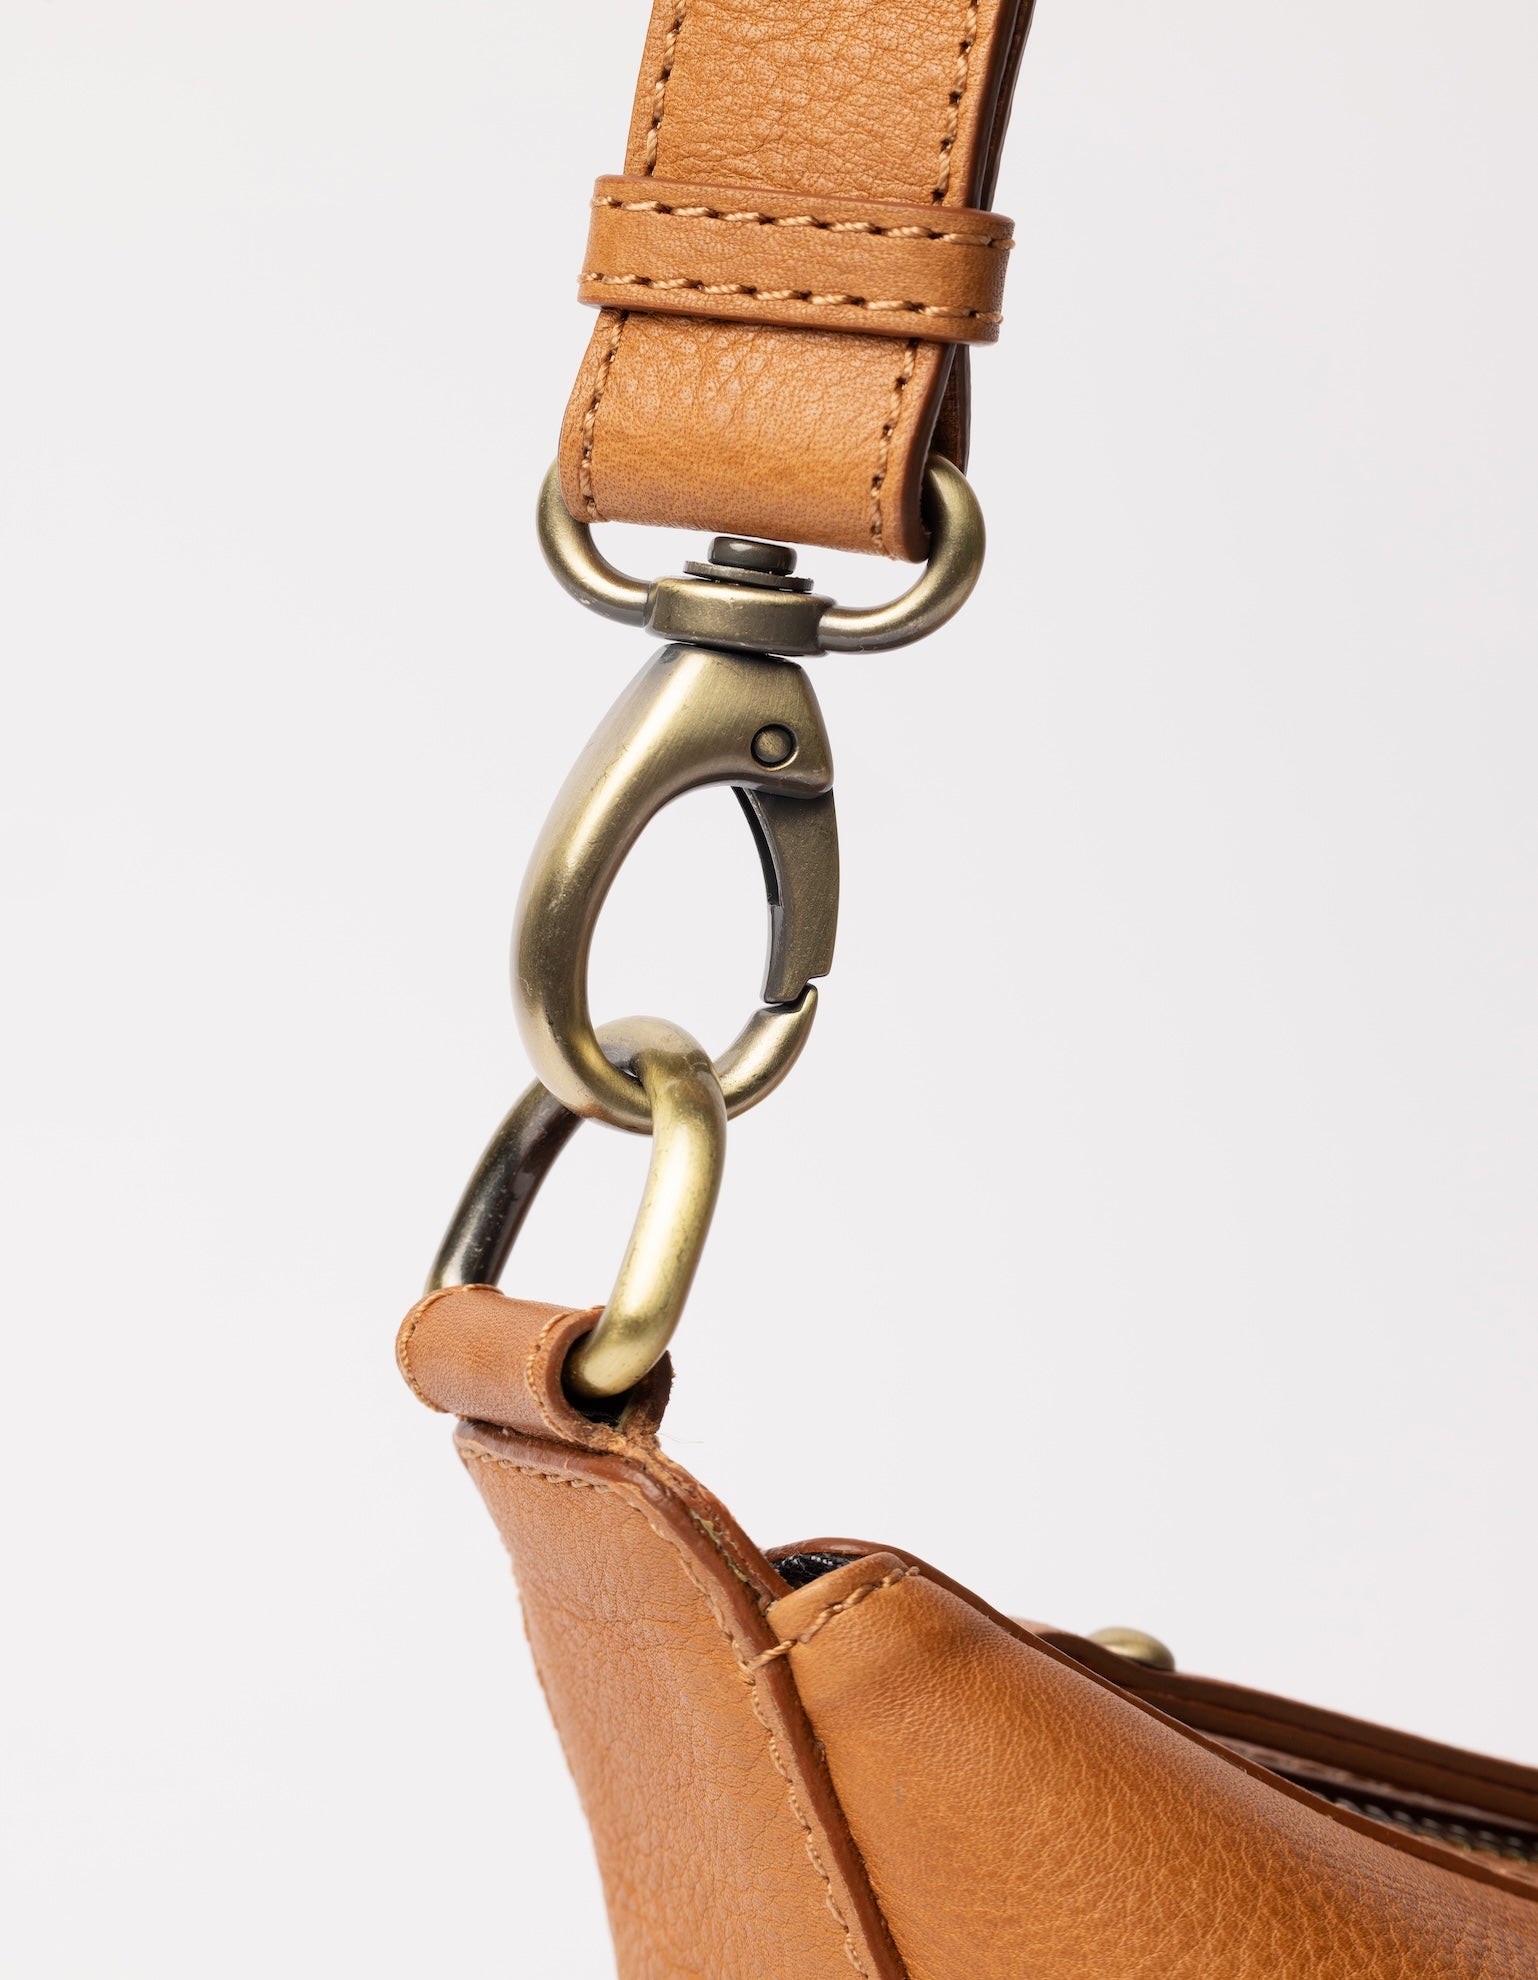 Slouchy leather bag - close-up of strap clasp